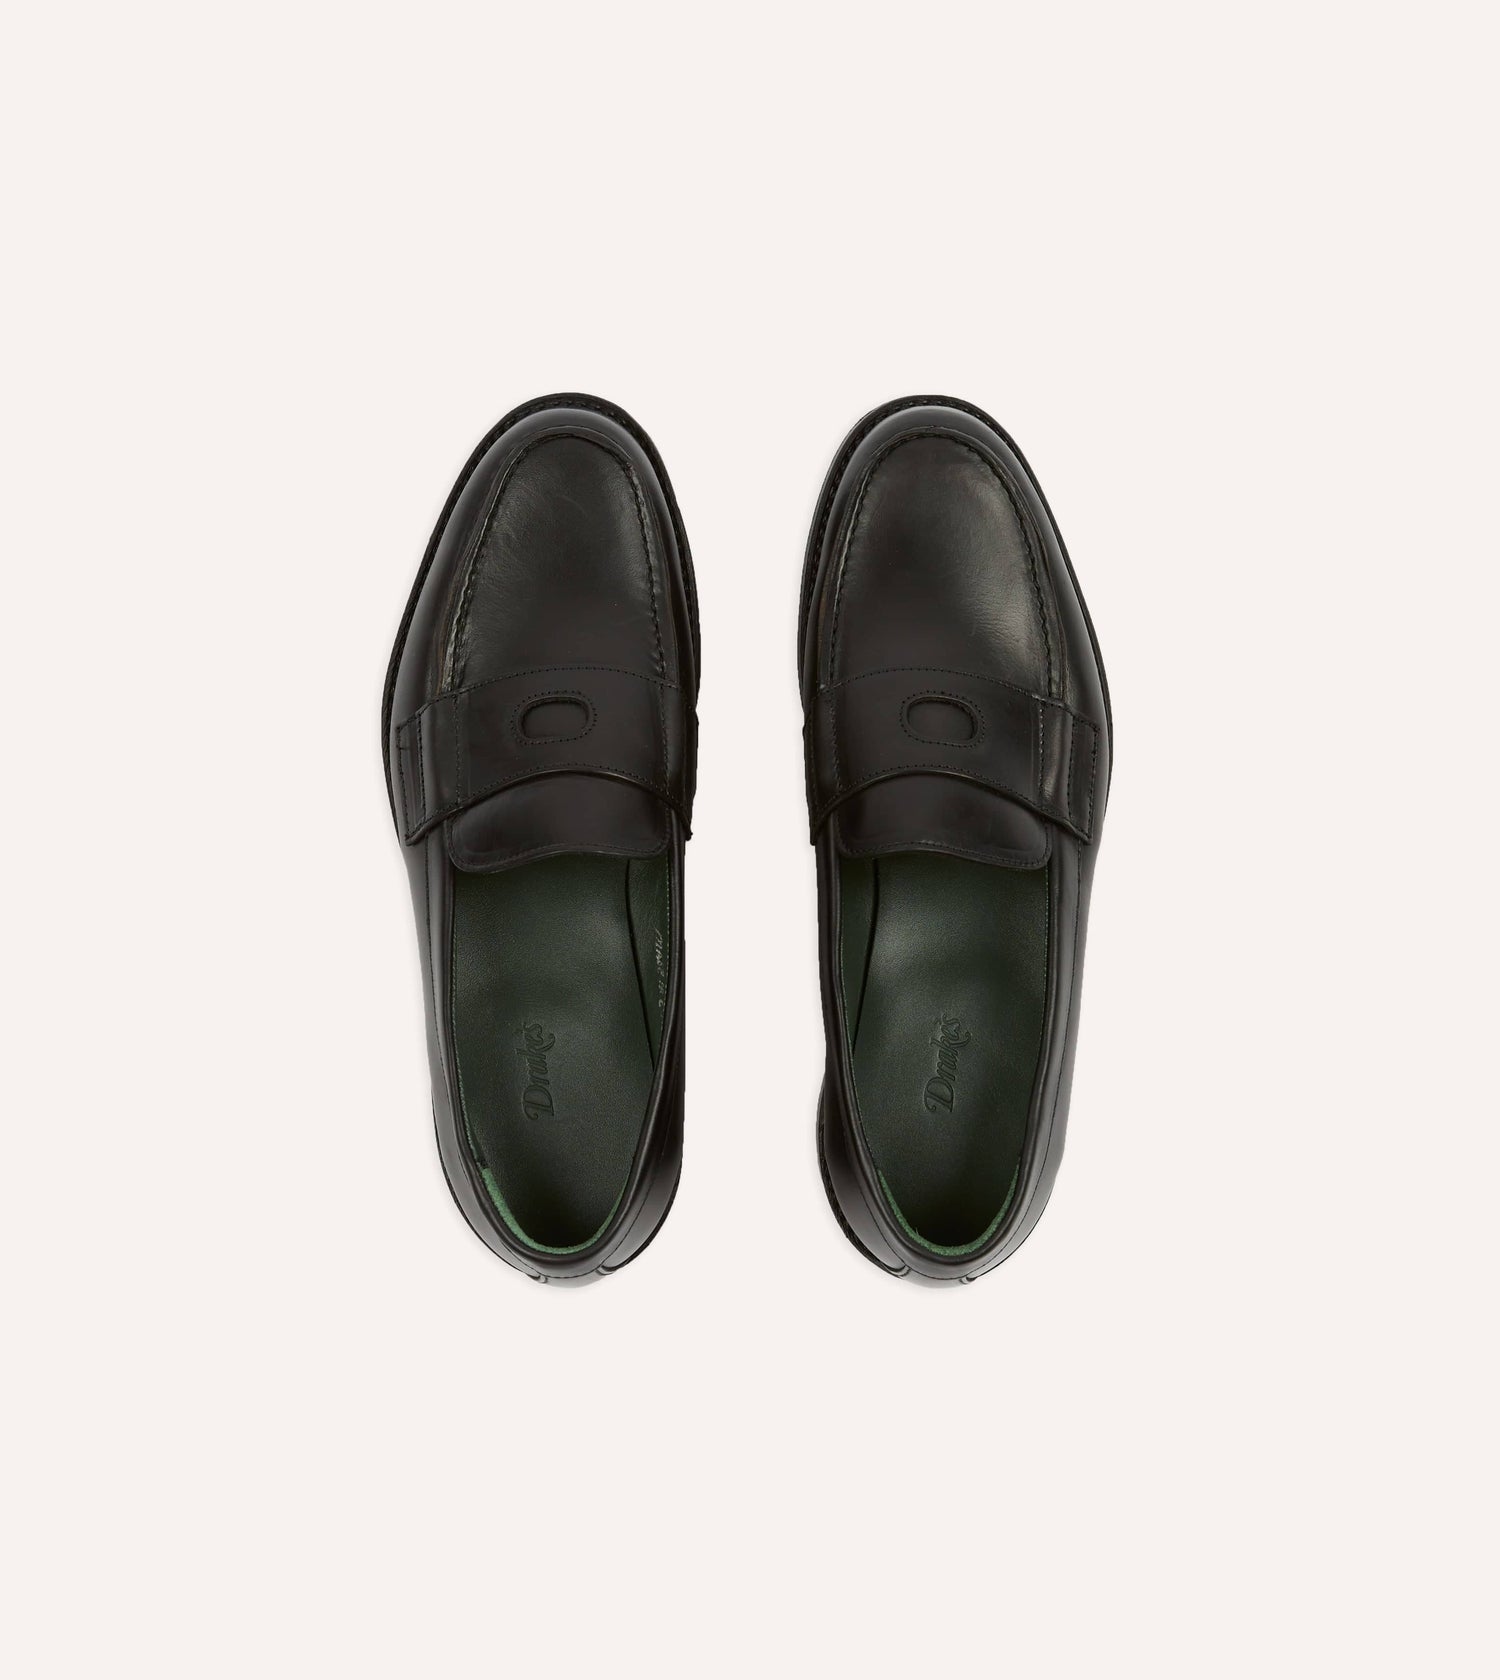 Black Leather Charles Goodyear Welted Penny Loafer